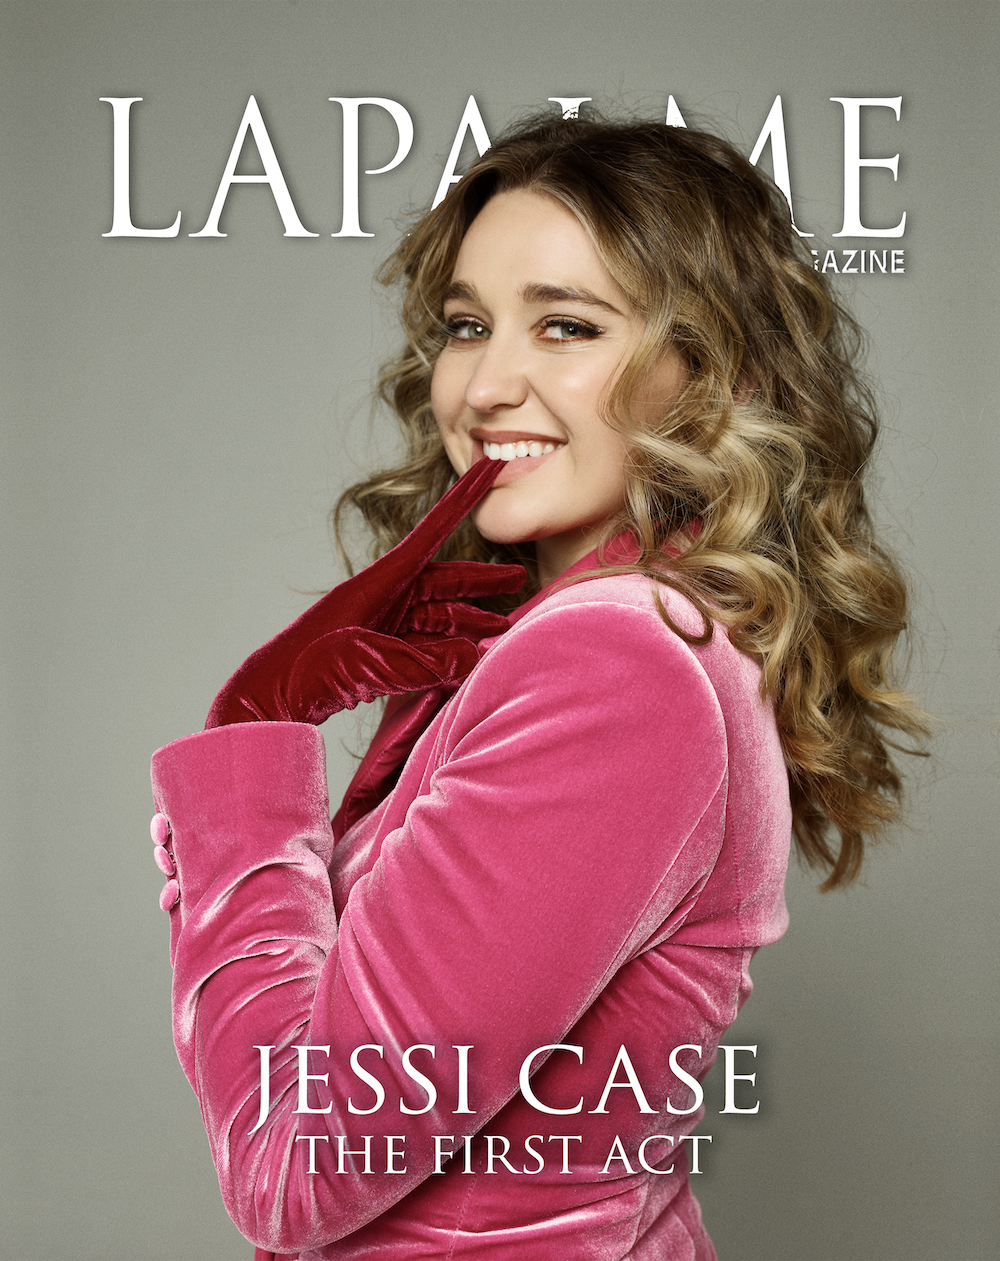 JESSI CASE – THE FIRST ACT